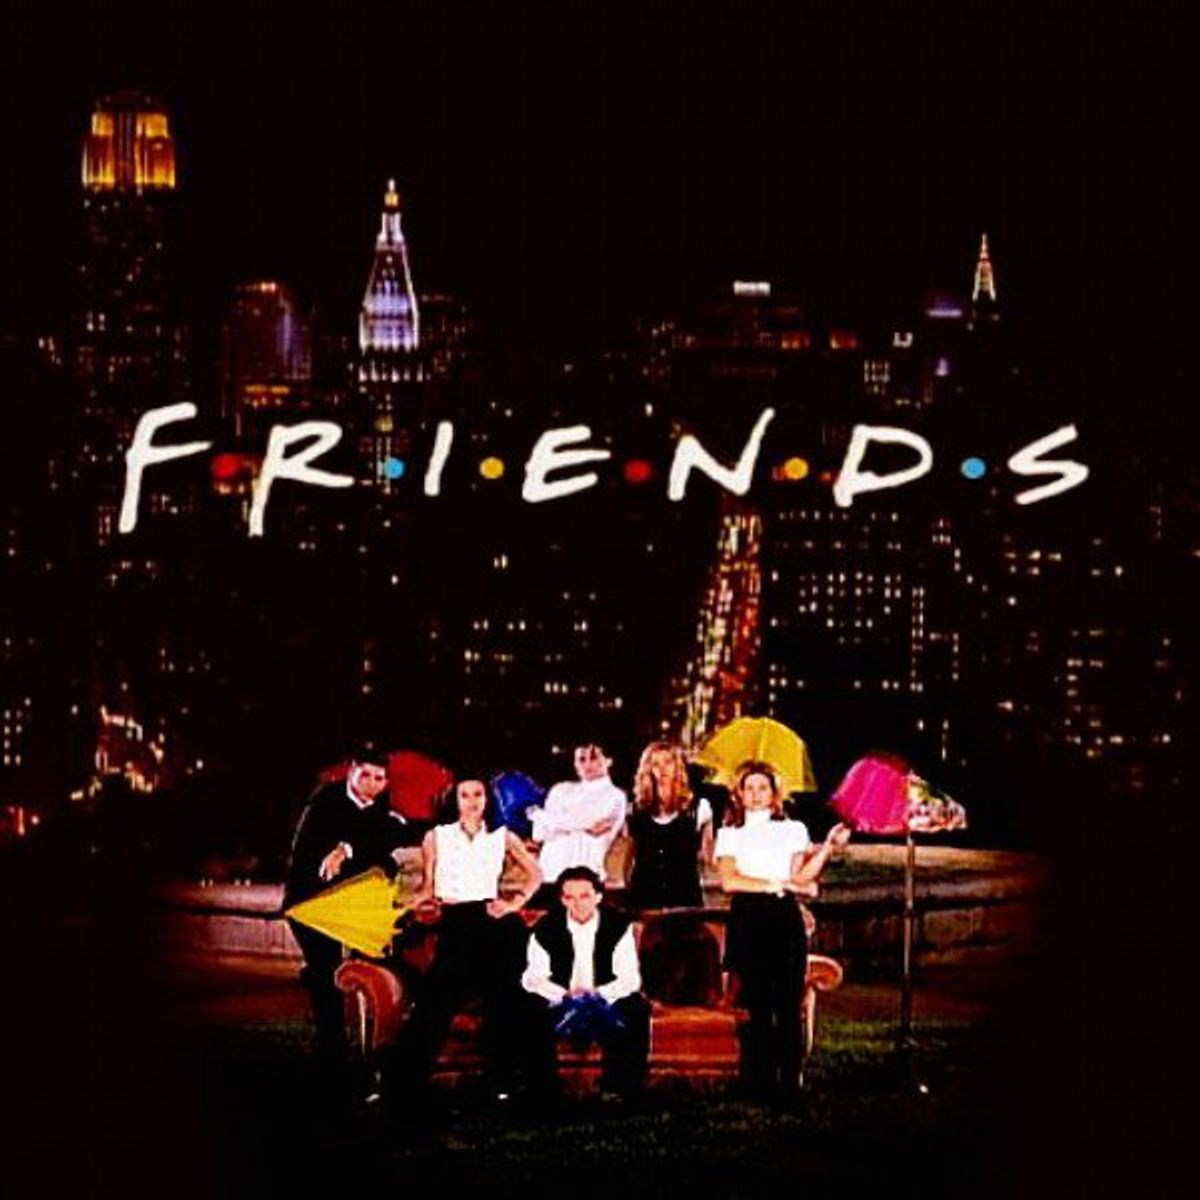 30 Thoughts & Questions I Had While Watching The First Episode of "Friends"